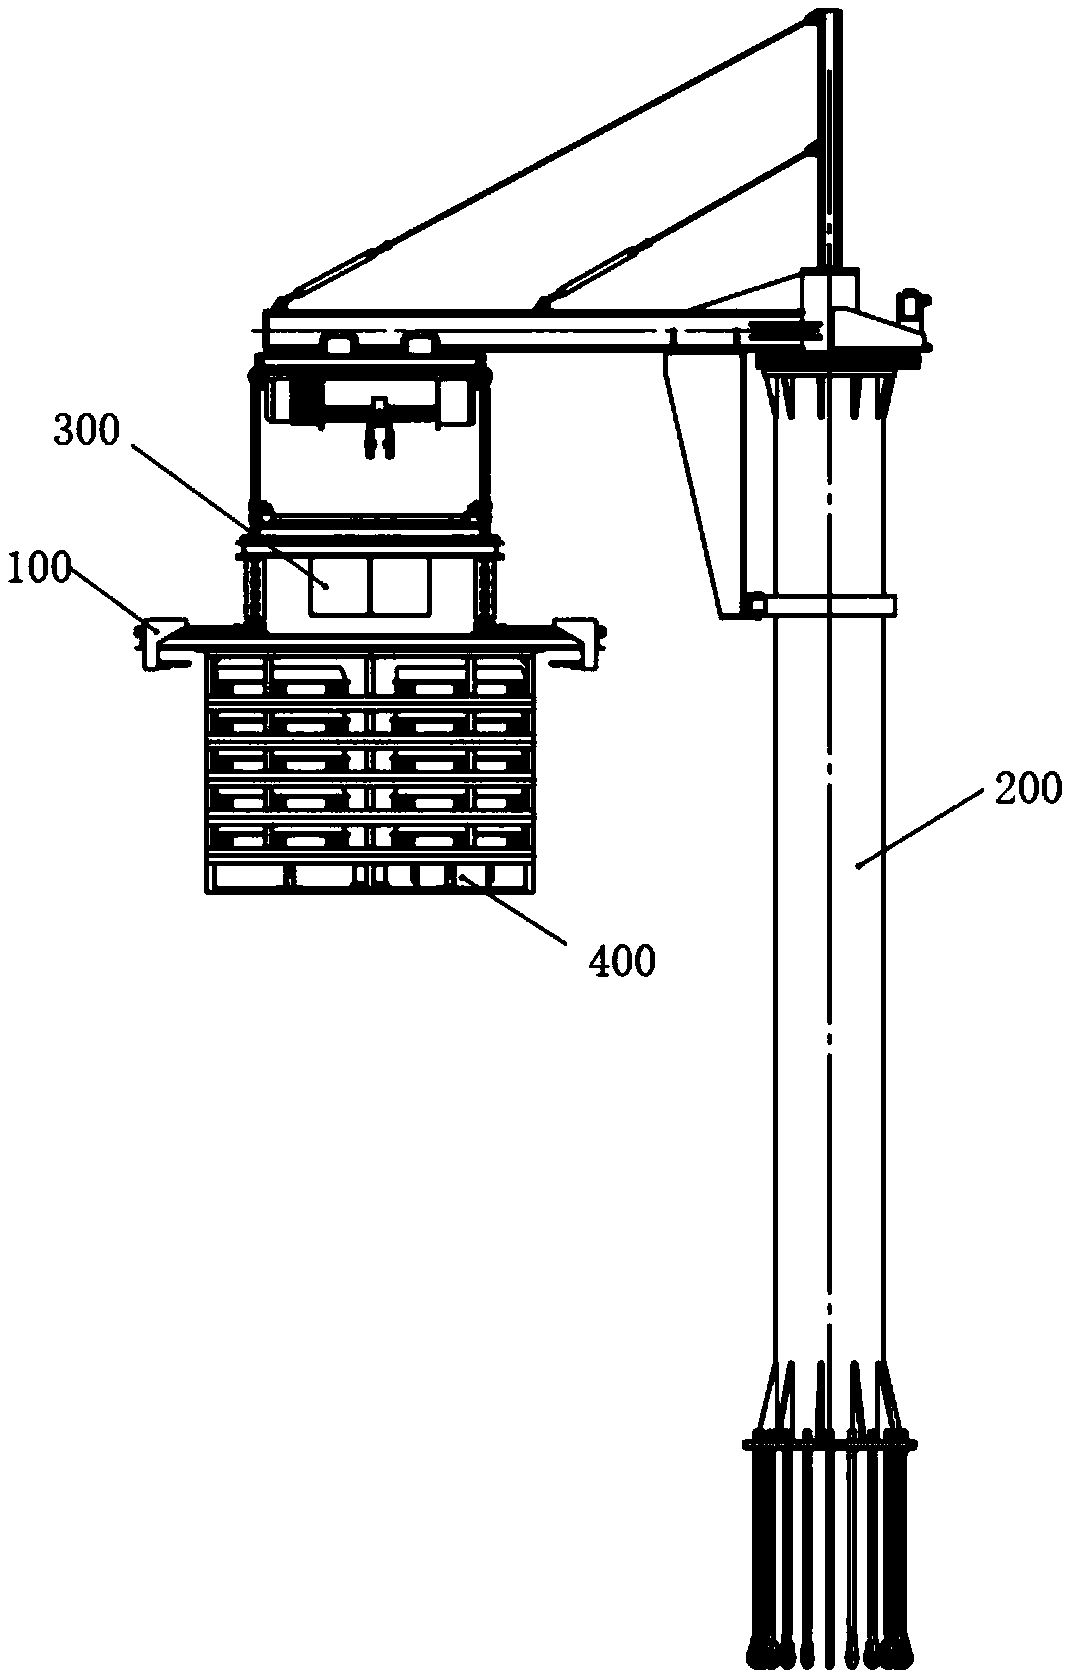 Hoisting device for adjustable electric vehicle charging and battery box replacing